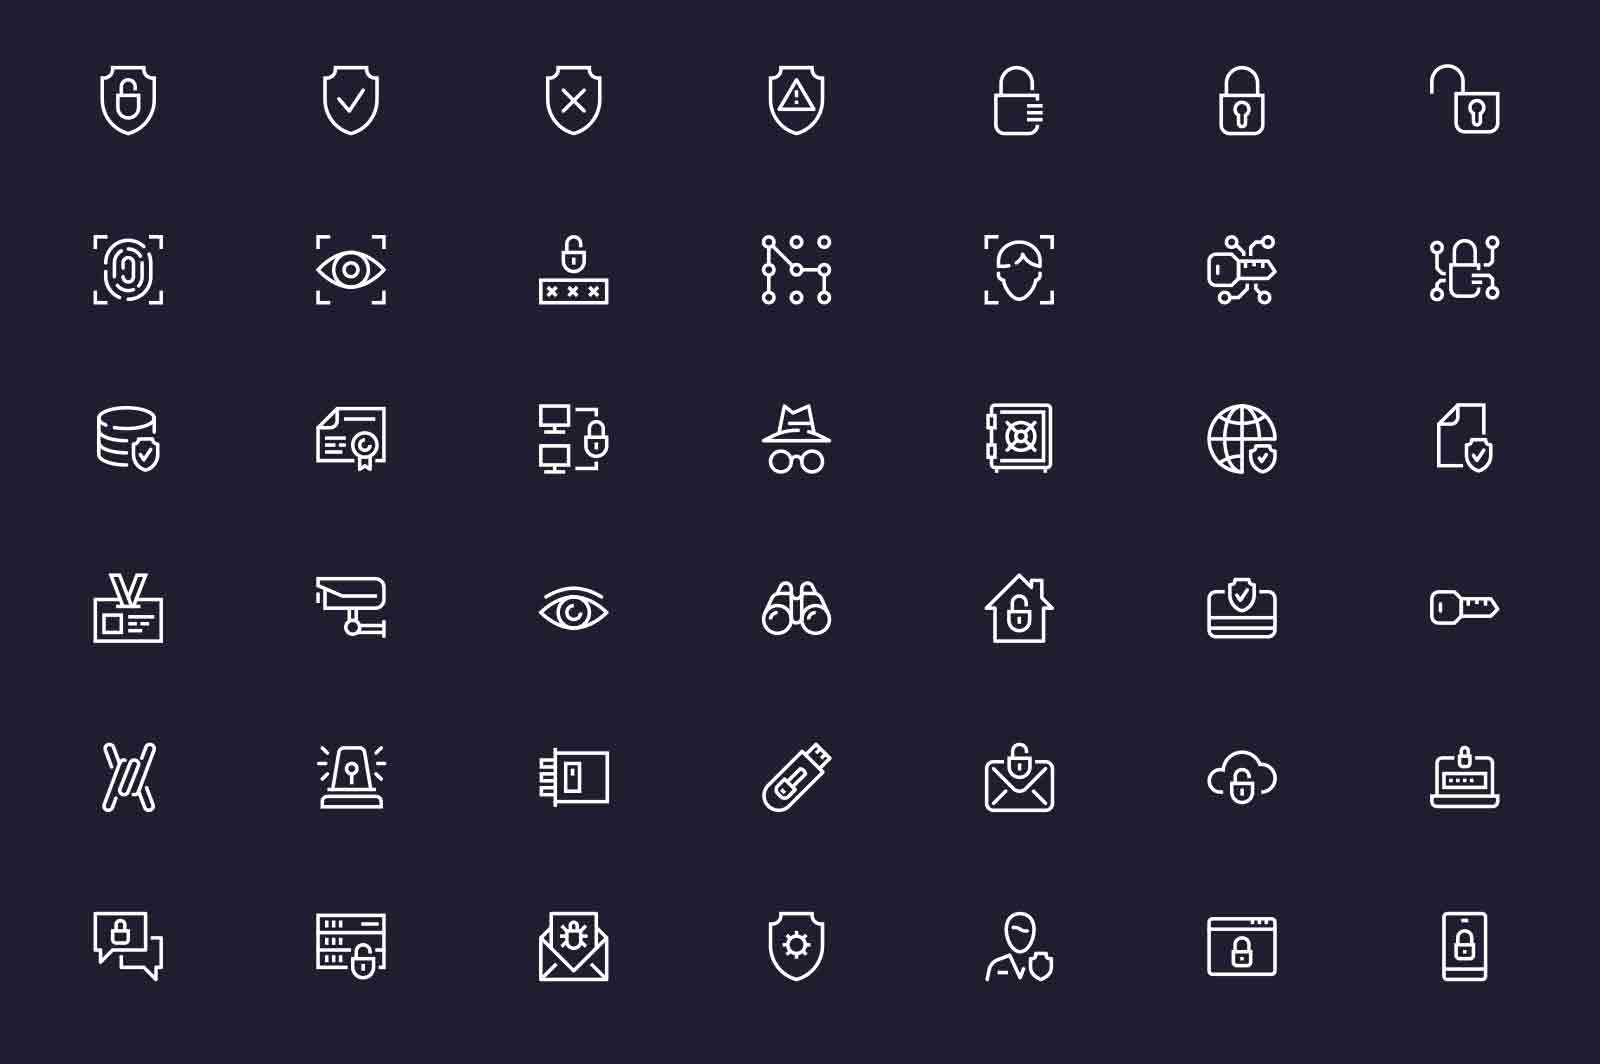 Personal information safety and protection icons set vector illustration. Digital lock, cyber security, fingerprint line icon. Dark background